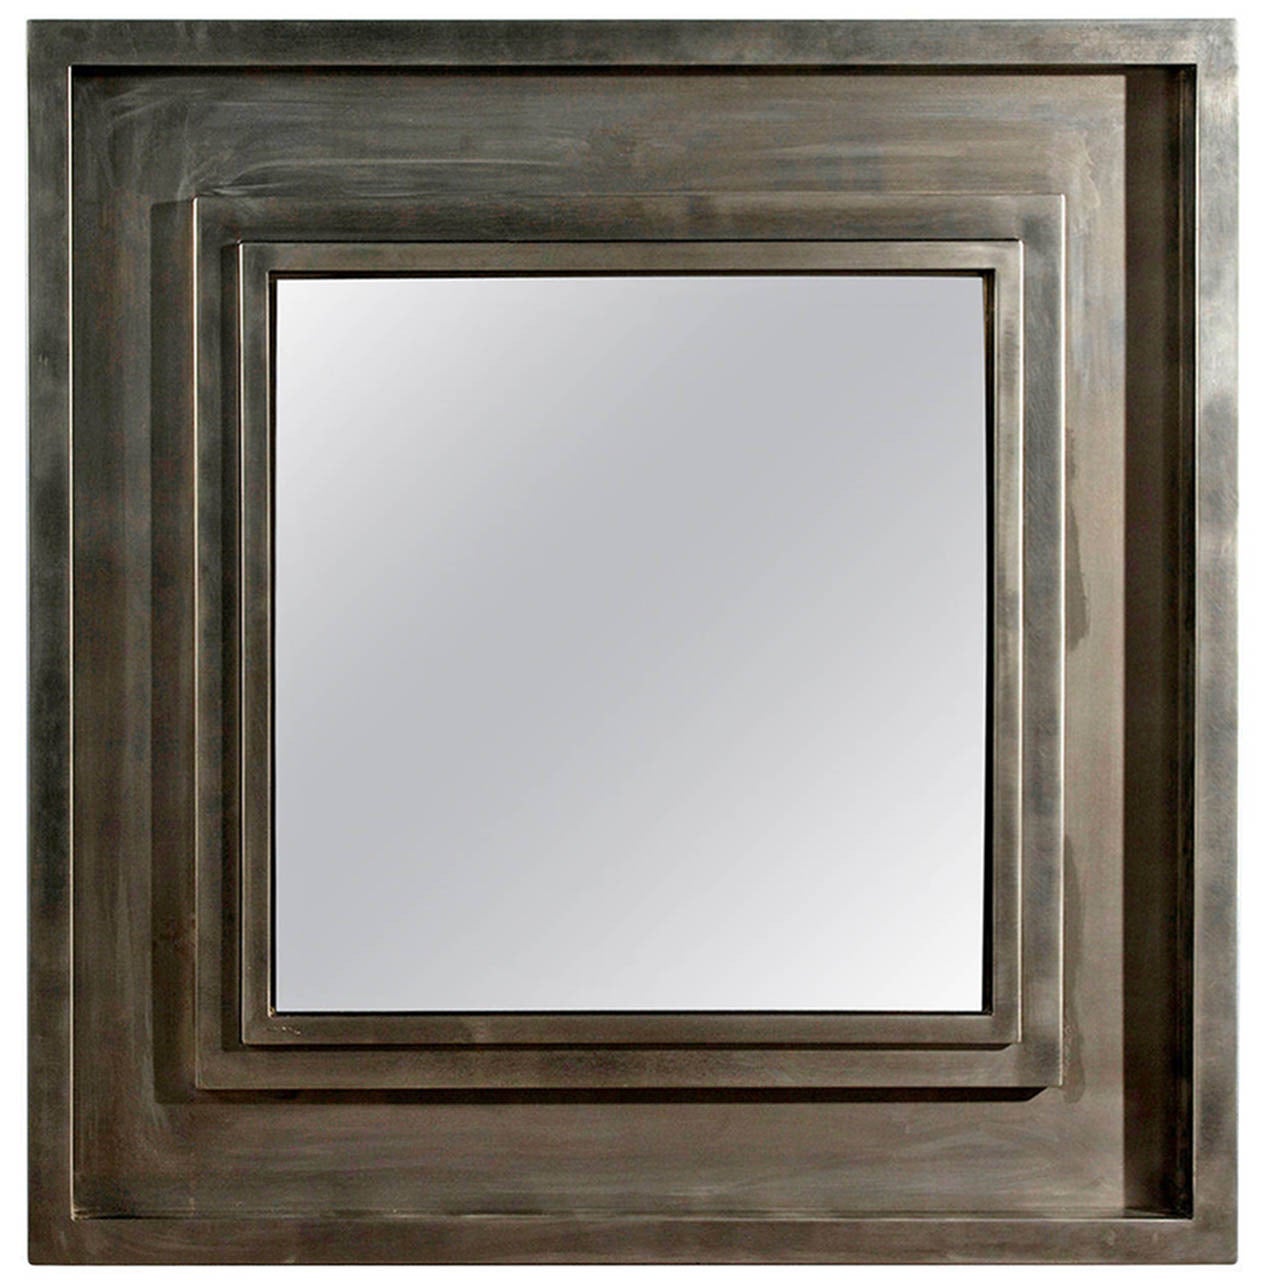 1970s French Brushed Steel Frame Mirror